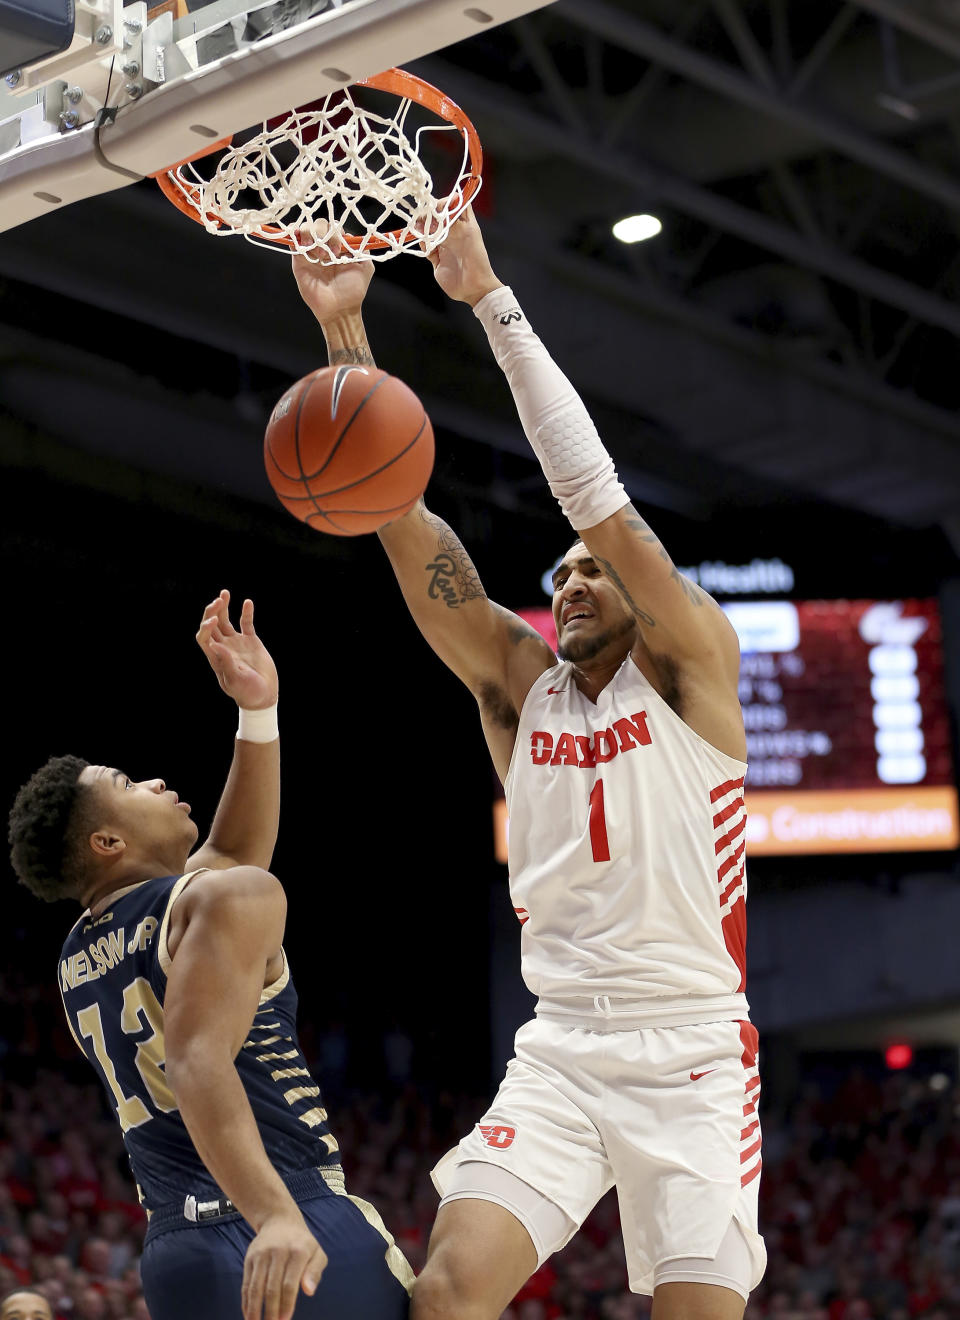 Dayton's Obi Toppin (1) dunks over George Washington's Jameer Nelson Jr (12) during the first half of an NCAA college basketball game Saturday, March 7, 2020, in Dayton, Ohio. (AP Photo/Tony Tribble)